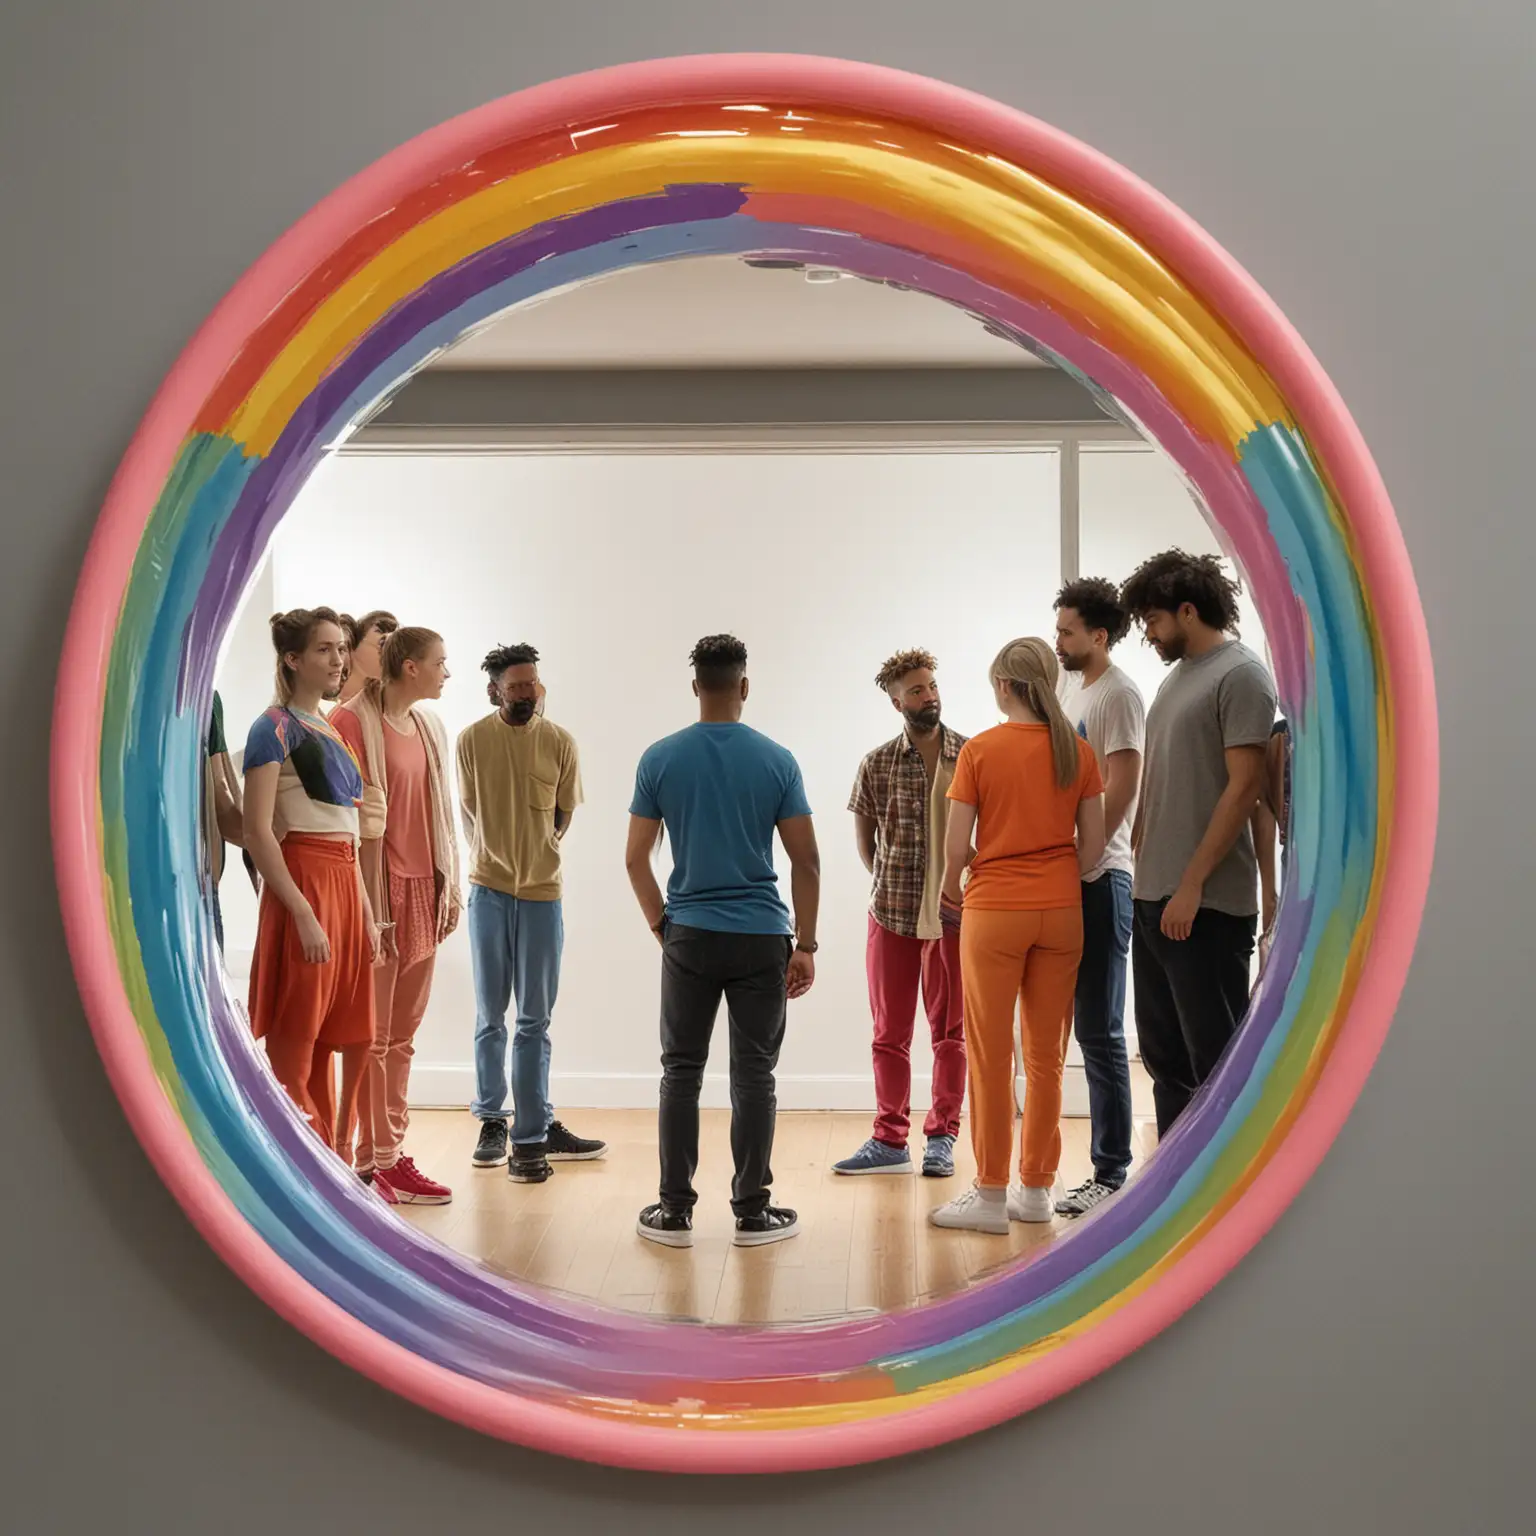 Diverse Group Admiring Rainbow Framed Mirror Reflections